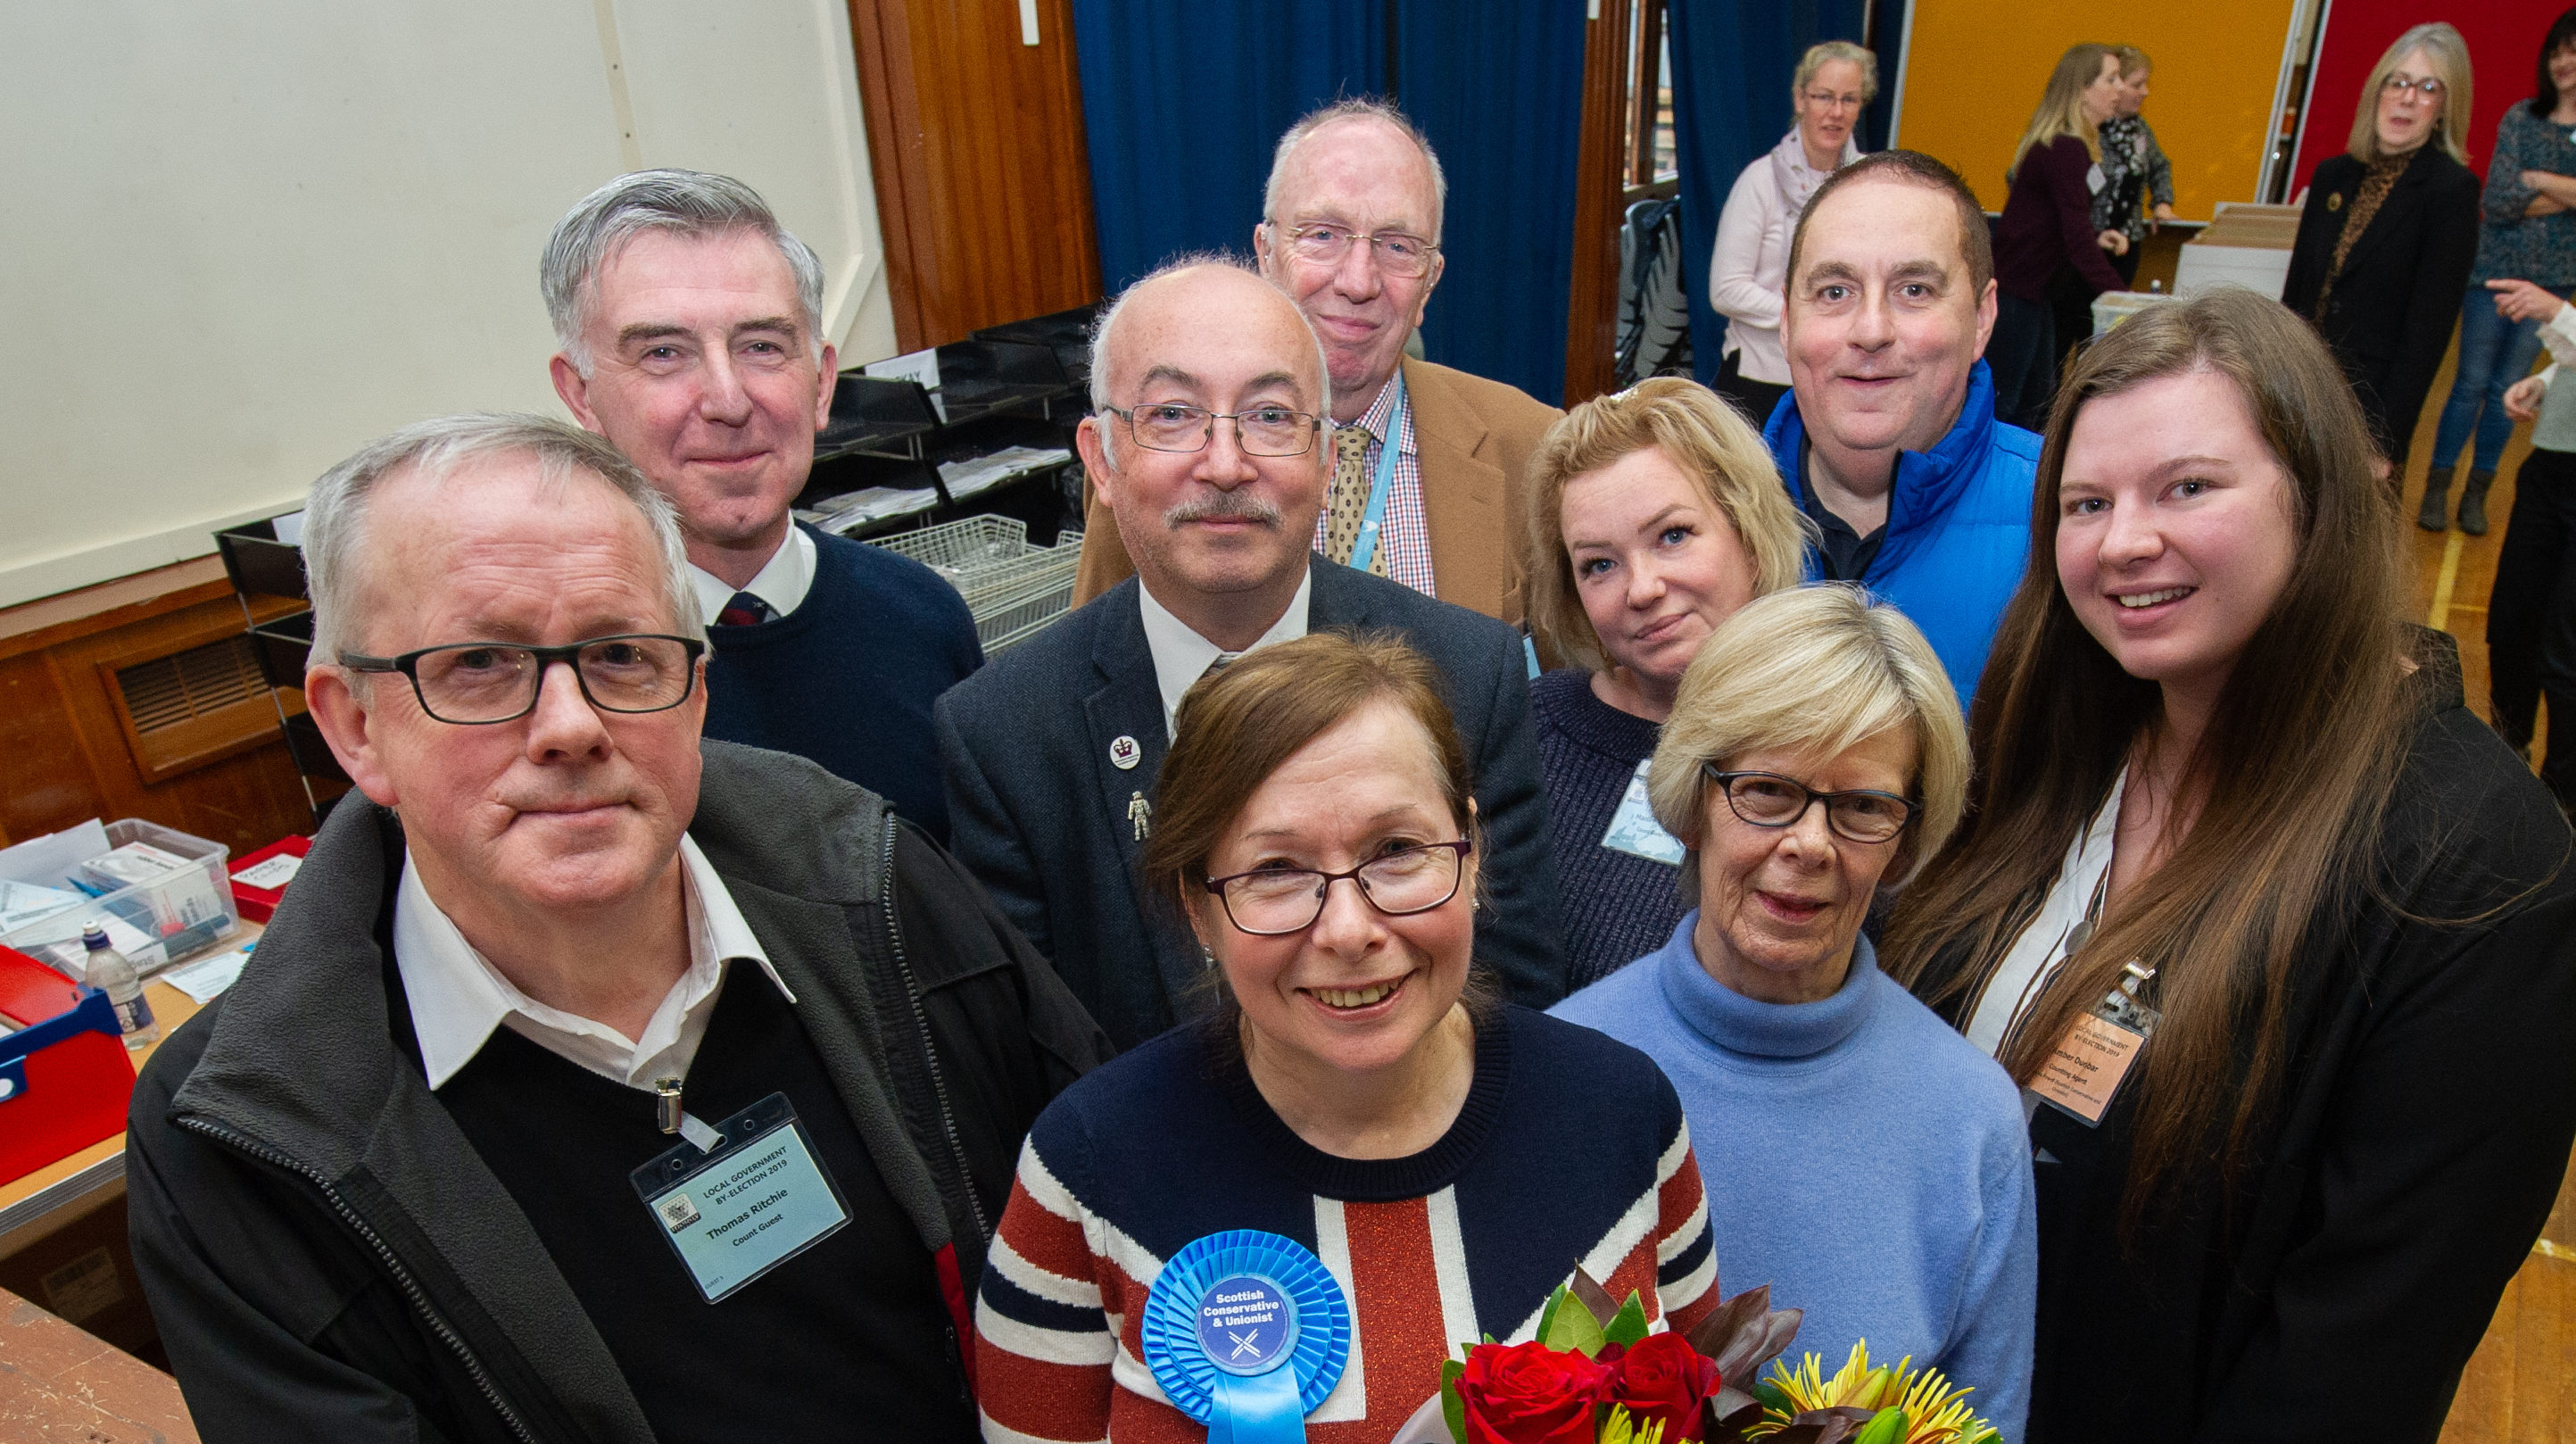 Winning Conservative candidate Laura Powell flanked by supporters. Picture by Jason Hedges.